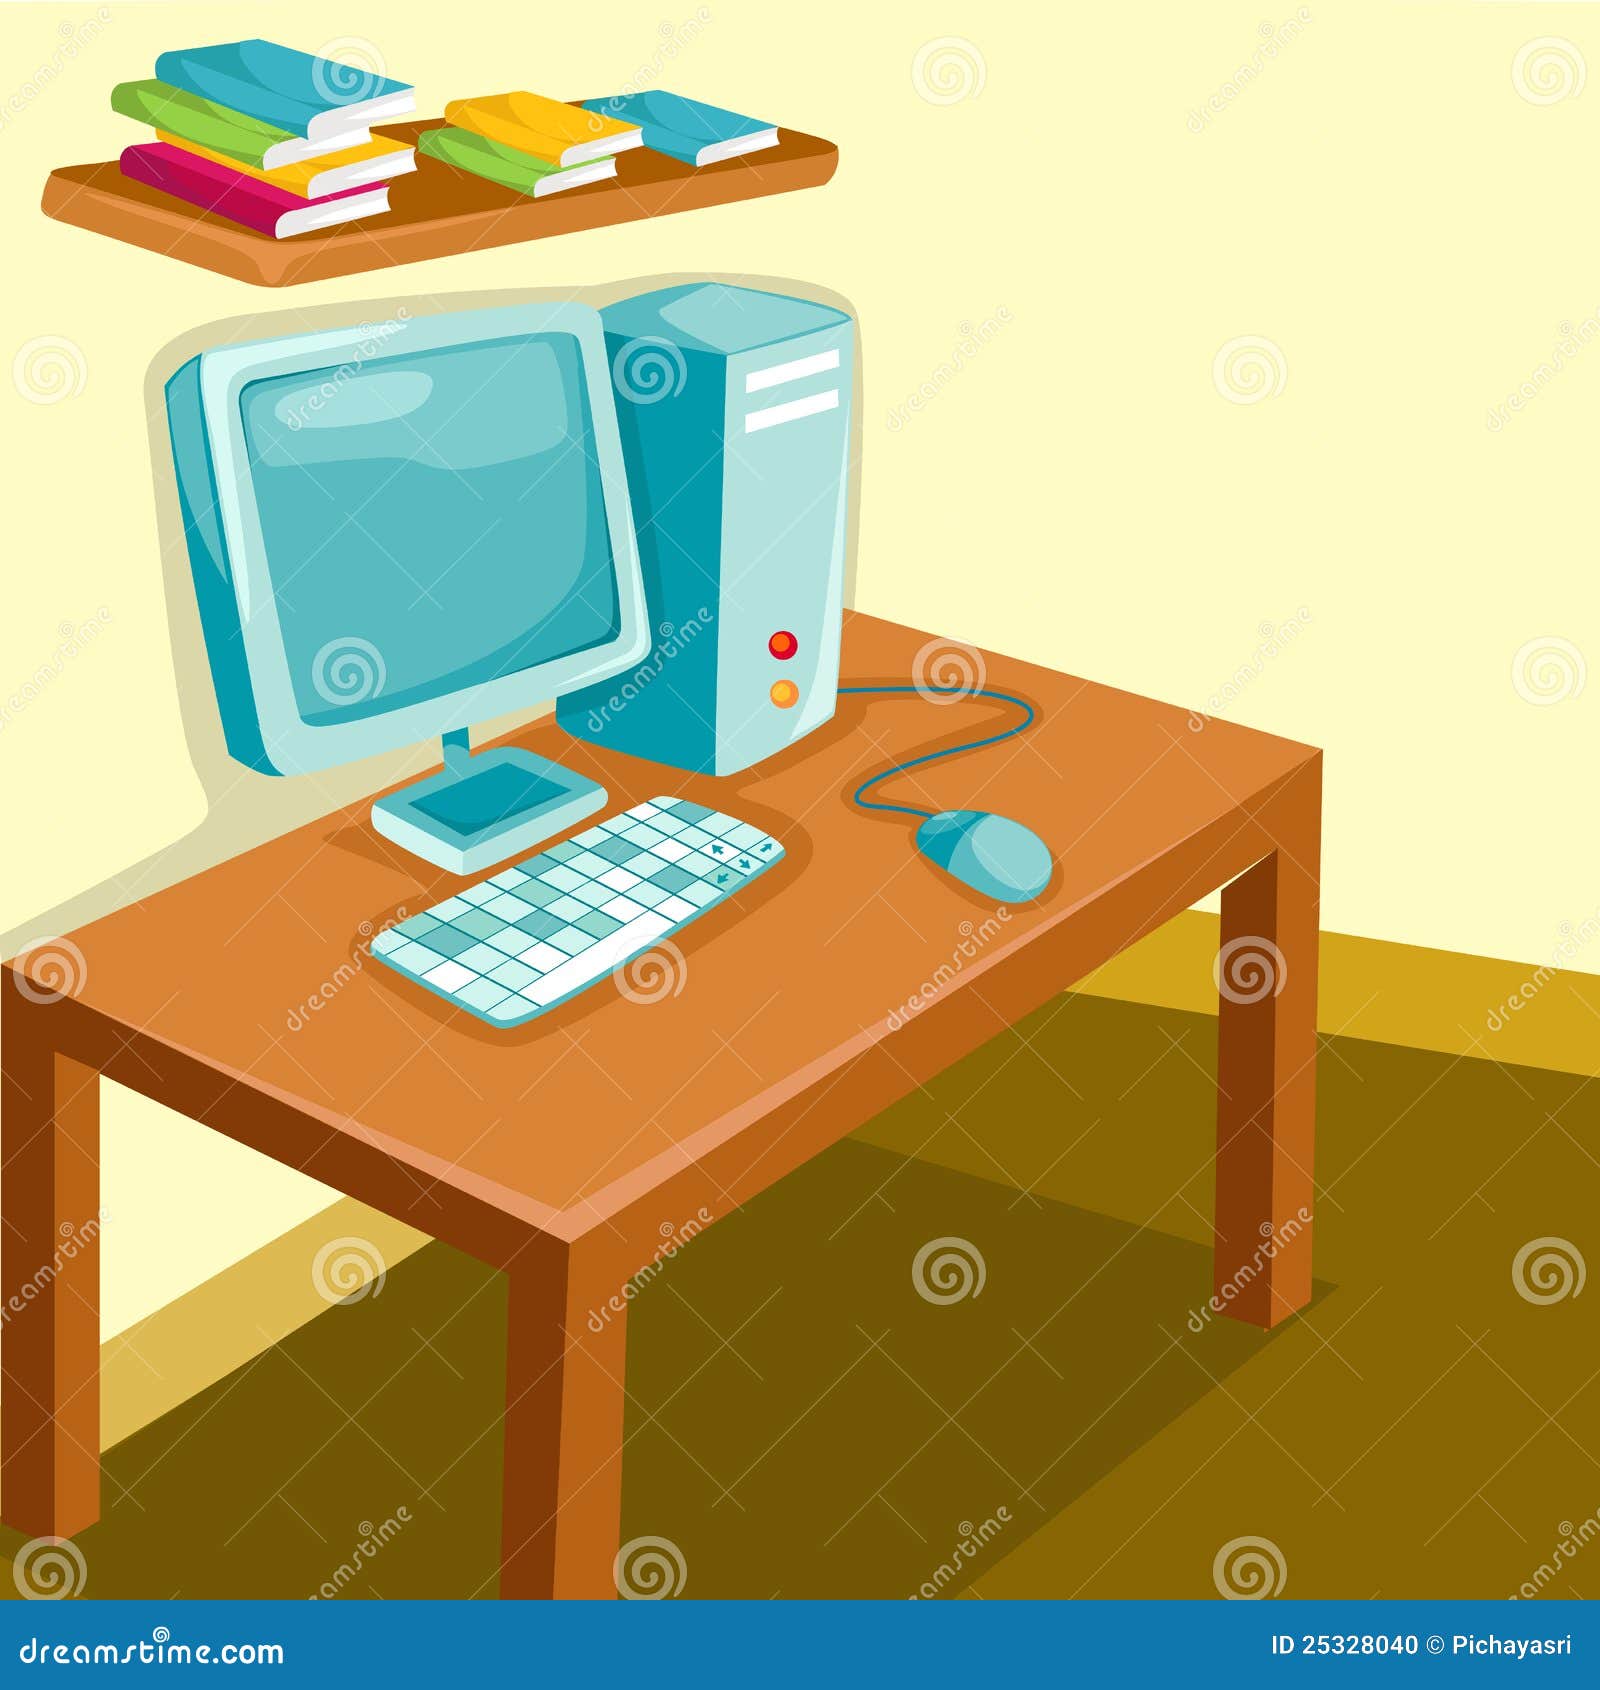 Study room stock vector. Illustration of graphic, furniture - 25328040